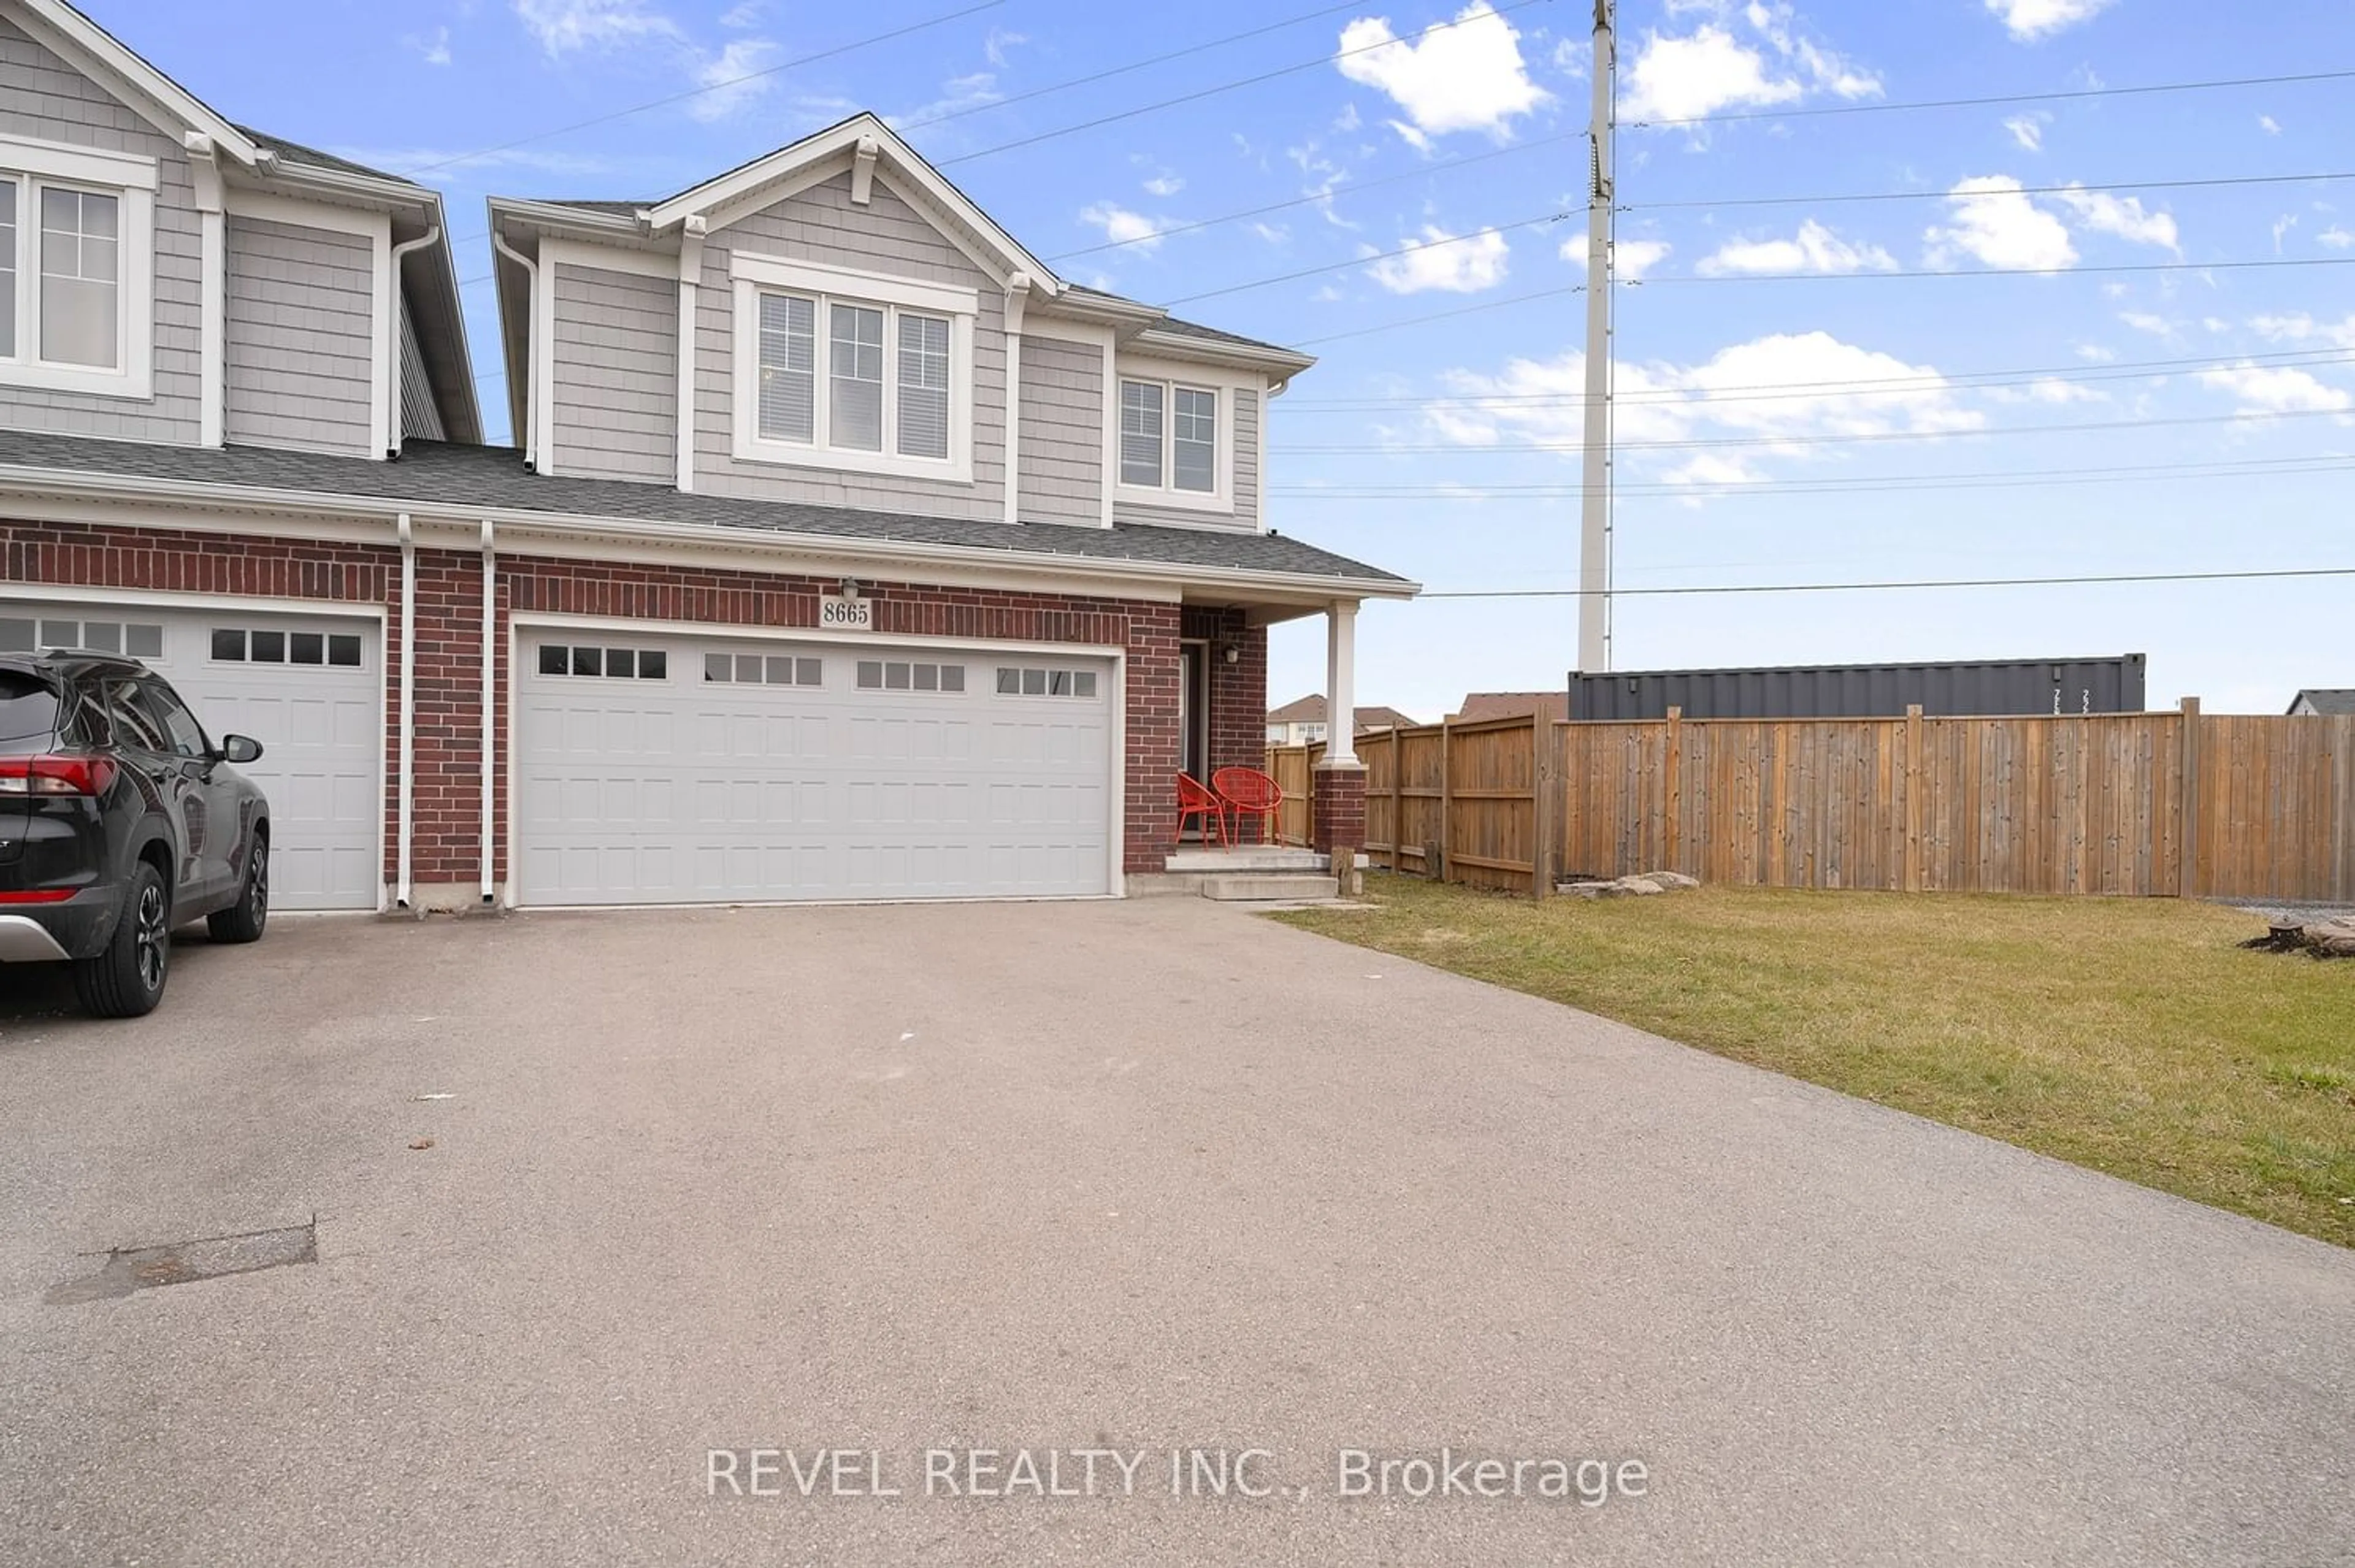 Frontside or backside of a home for 8665 Upper Canada Dr, Niagara Falls Ontario L2H 0B7